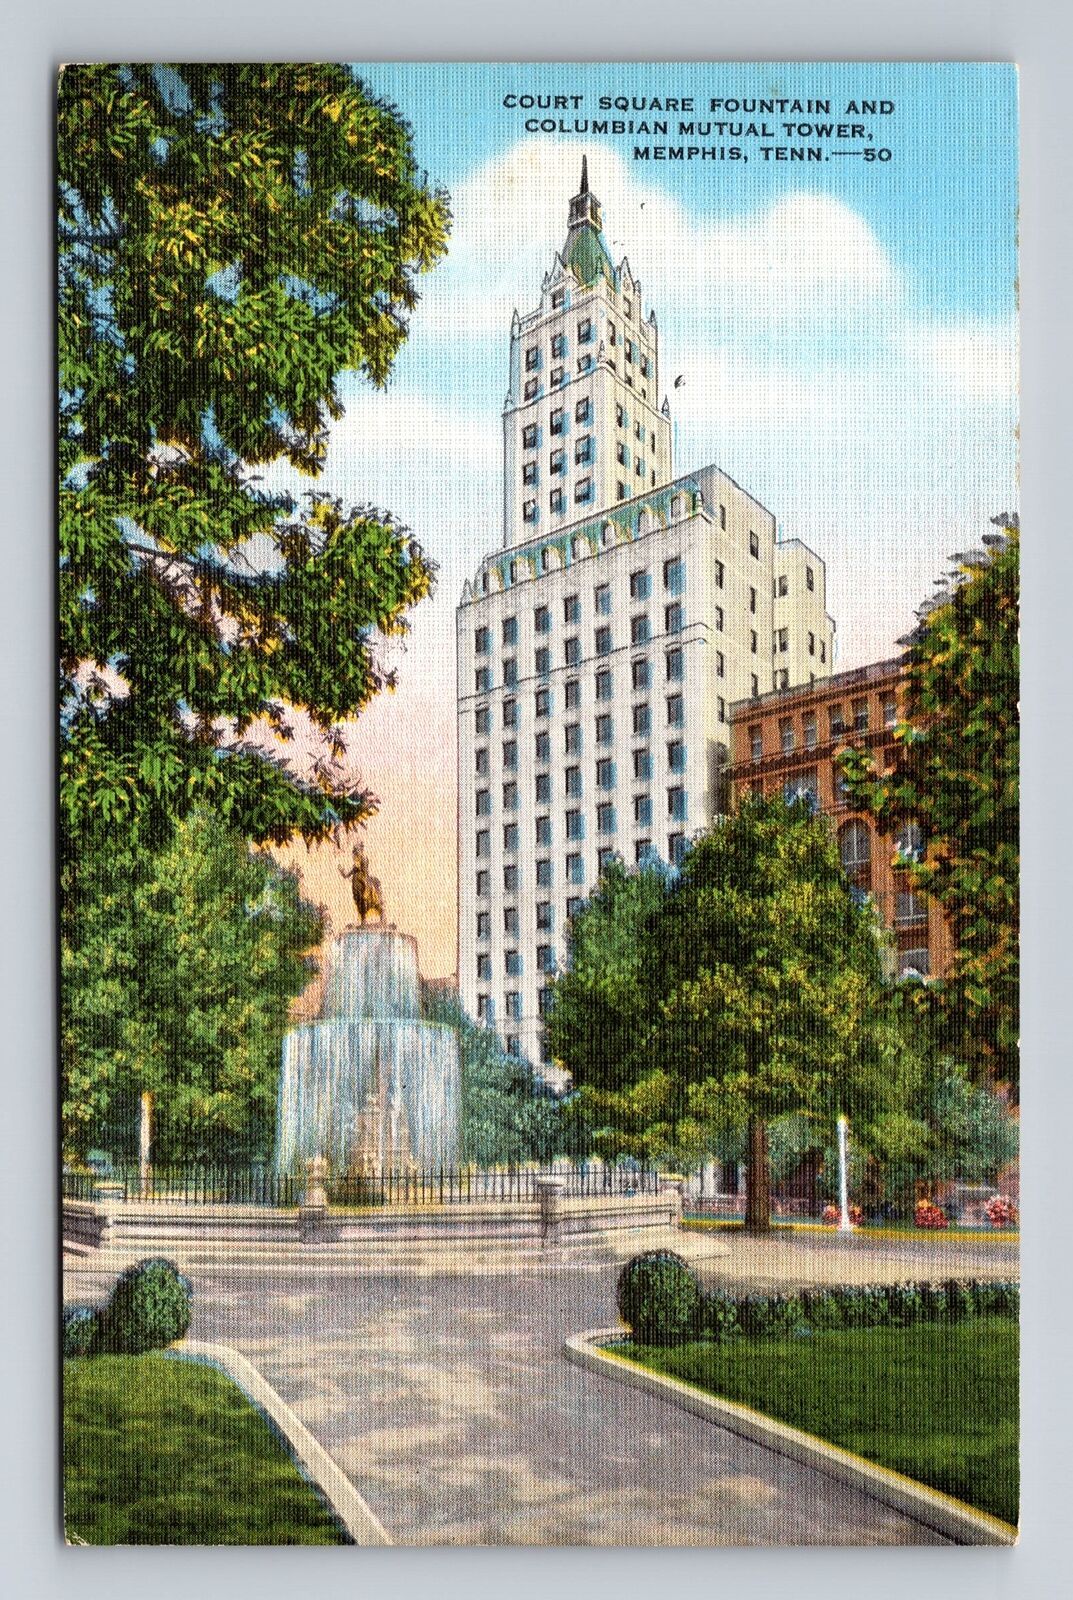 Memphis TN-Tennessee, Columbian Mutual Tower Ct Square Fountain Vintage Postcard